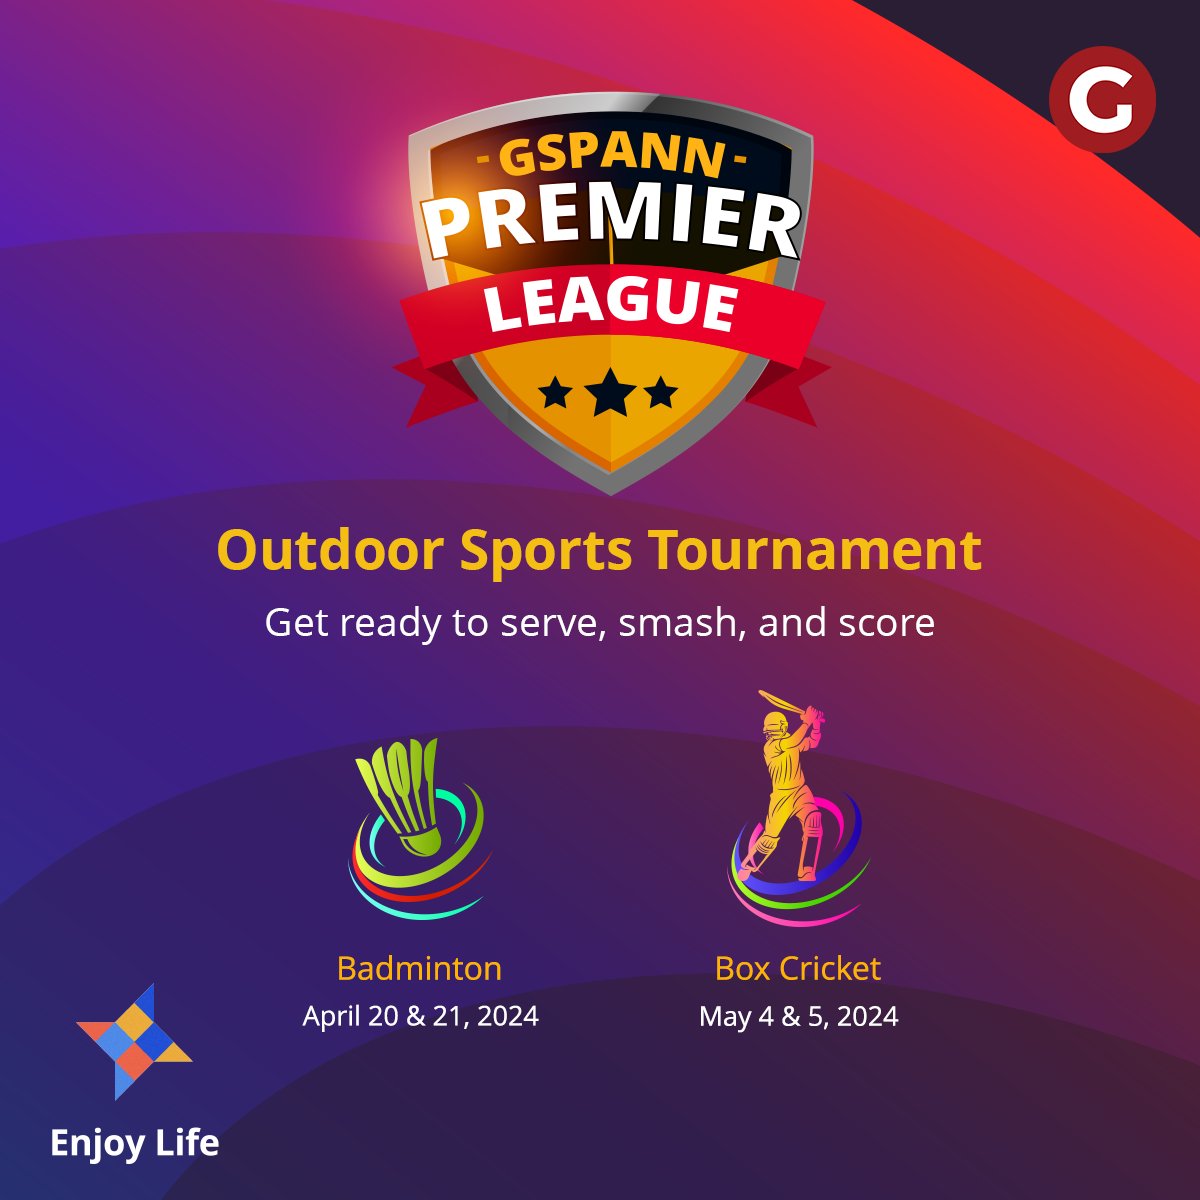 We are thrilled to announce the #GSPANN Premier League – #OutdoorSports Tournament organized by our Antarnad sports club.

The tournament will feature two games: #Badminton and #Box Cricket! 

Let the games begin! 

#LetsCoCreate #OutdoorSports #SummerFun #SportsFever #EnjoyLife